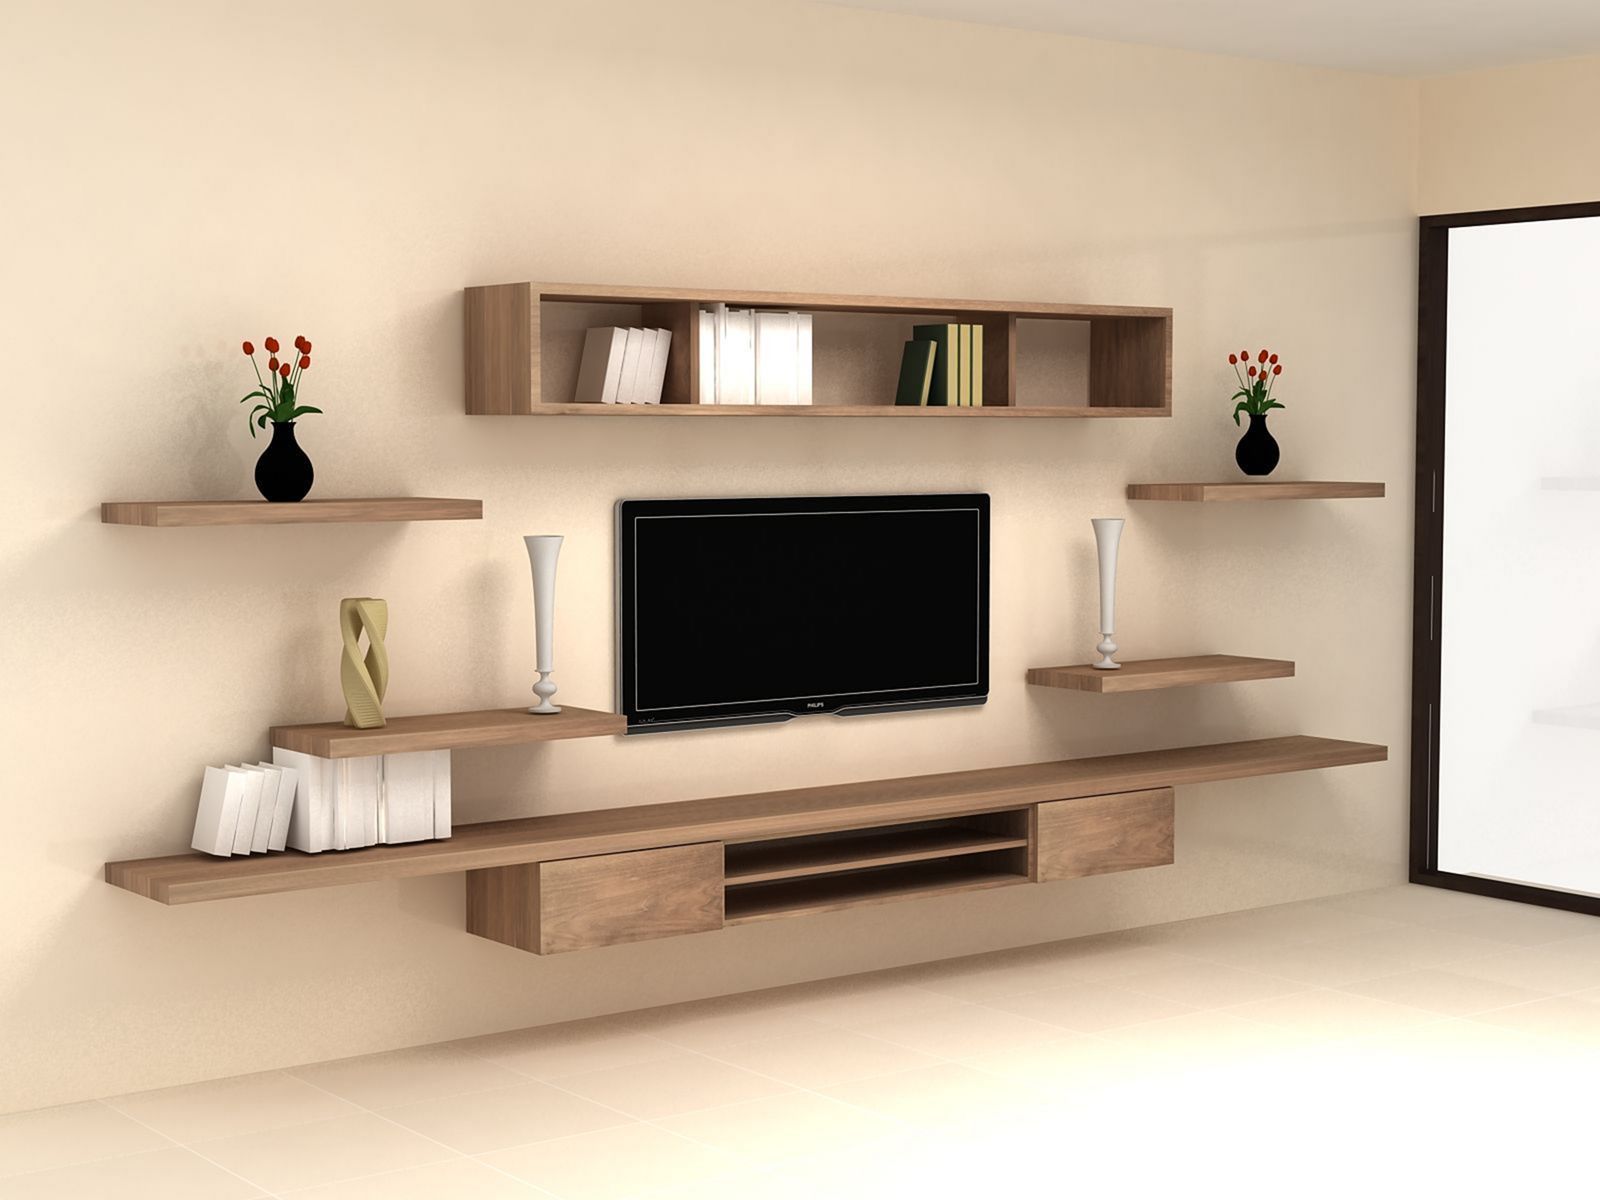 28 Elegant Modern Wall Tv Cabinet Ideas For Living Room Regarding Wall Mounted Tv Cabinet Ikea (View 5 of 15)